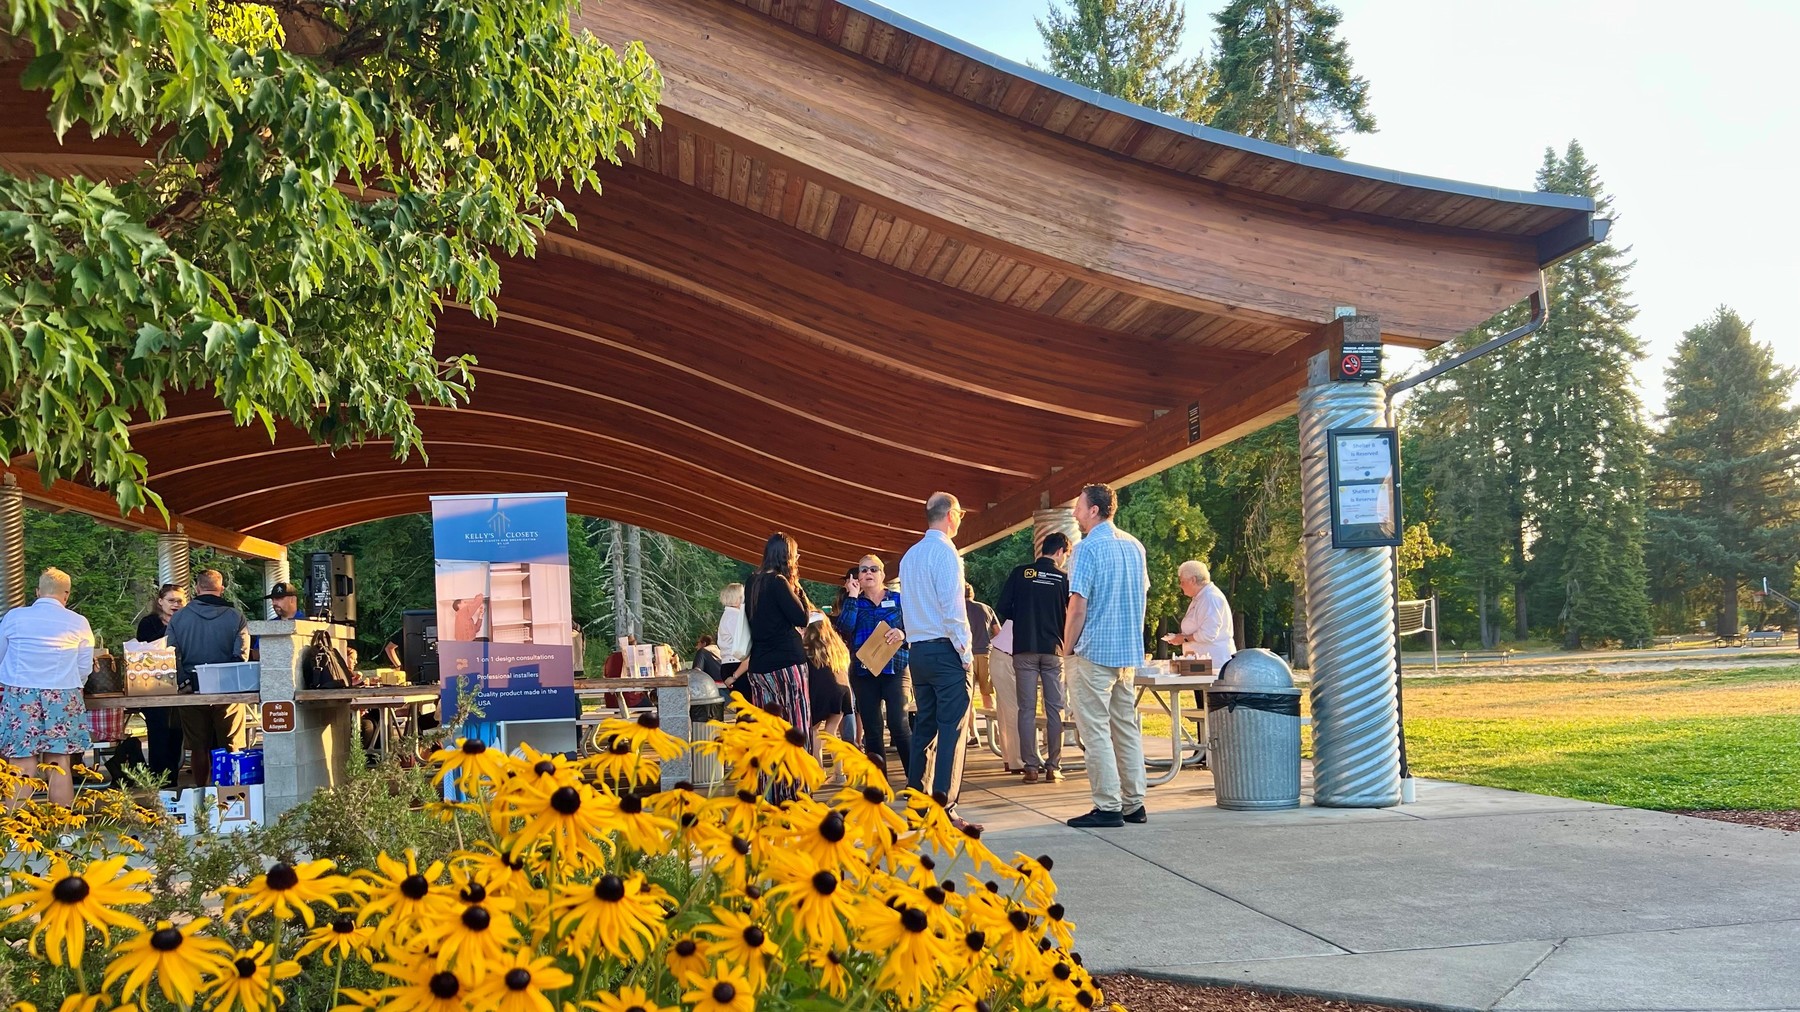 A local business event takes place in outdoor shelters on a sunny morning